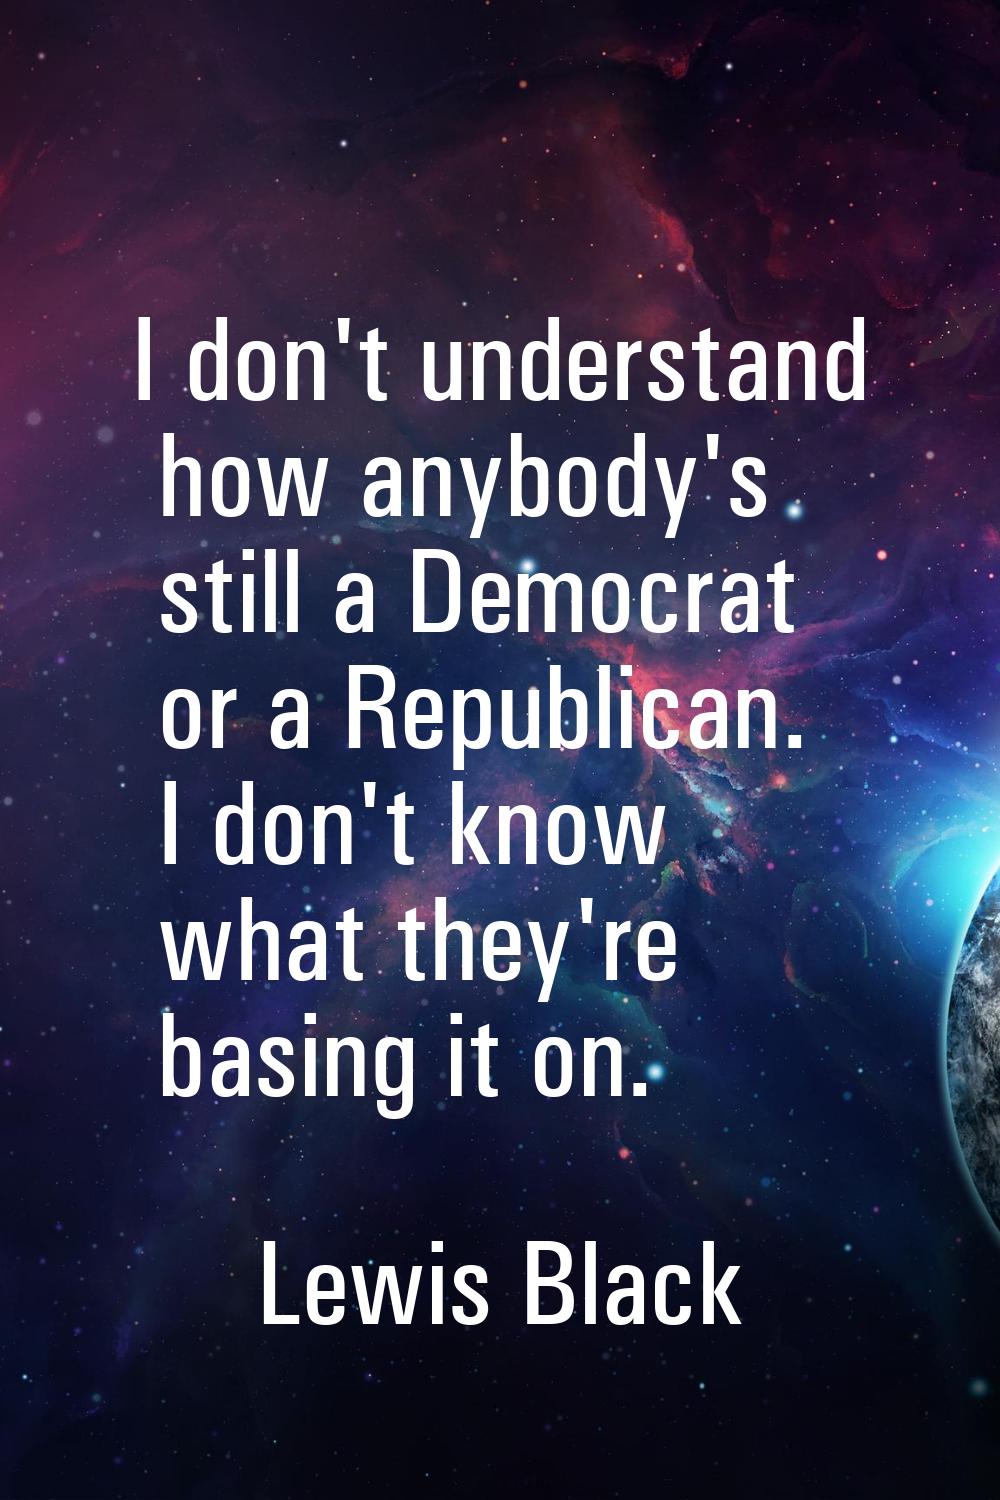 I don't understand how anybody's still a Democrat or a Republican. I don't know what they're basing